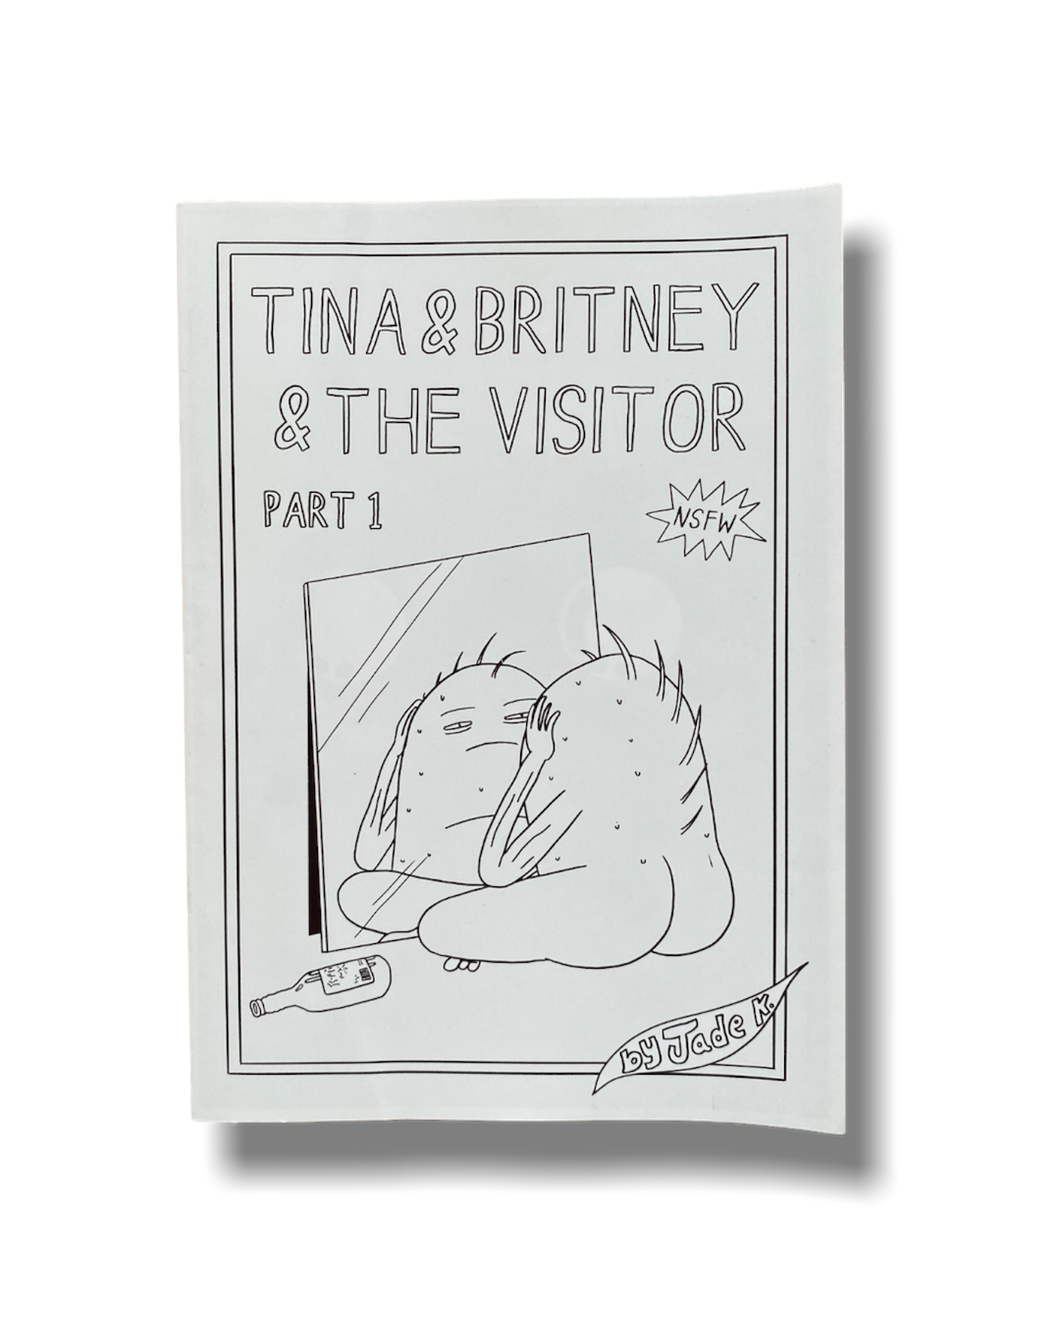 Tina & Britney & The Visitor (Part 1)